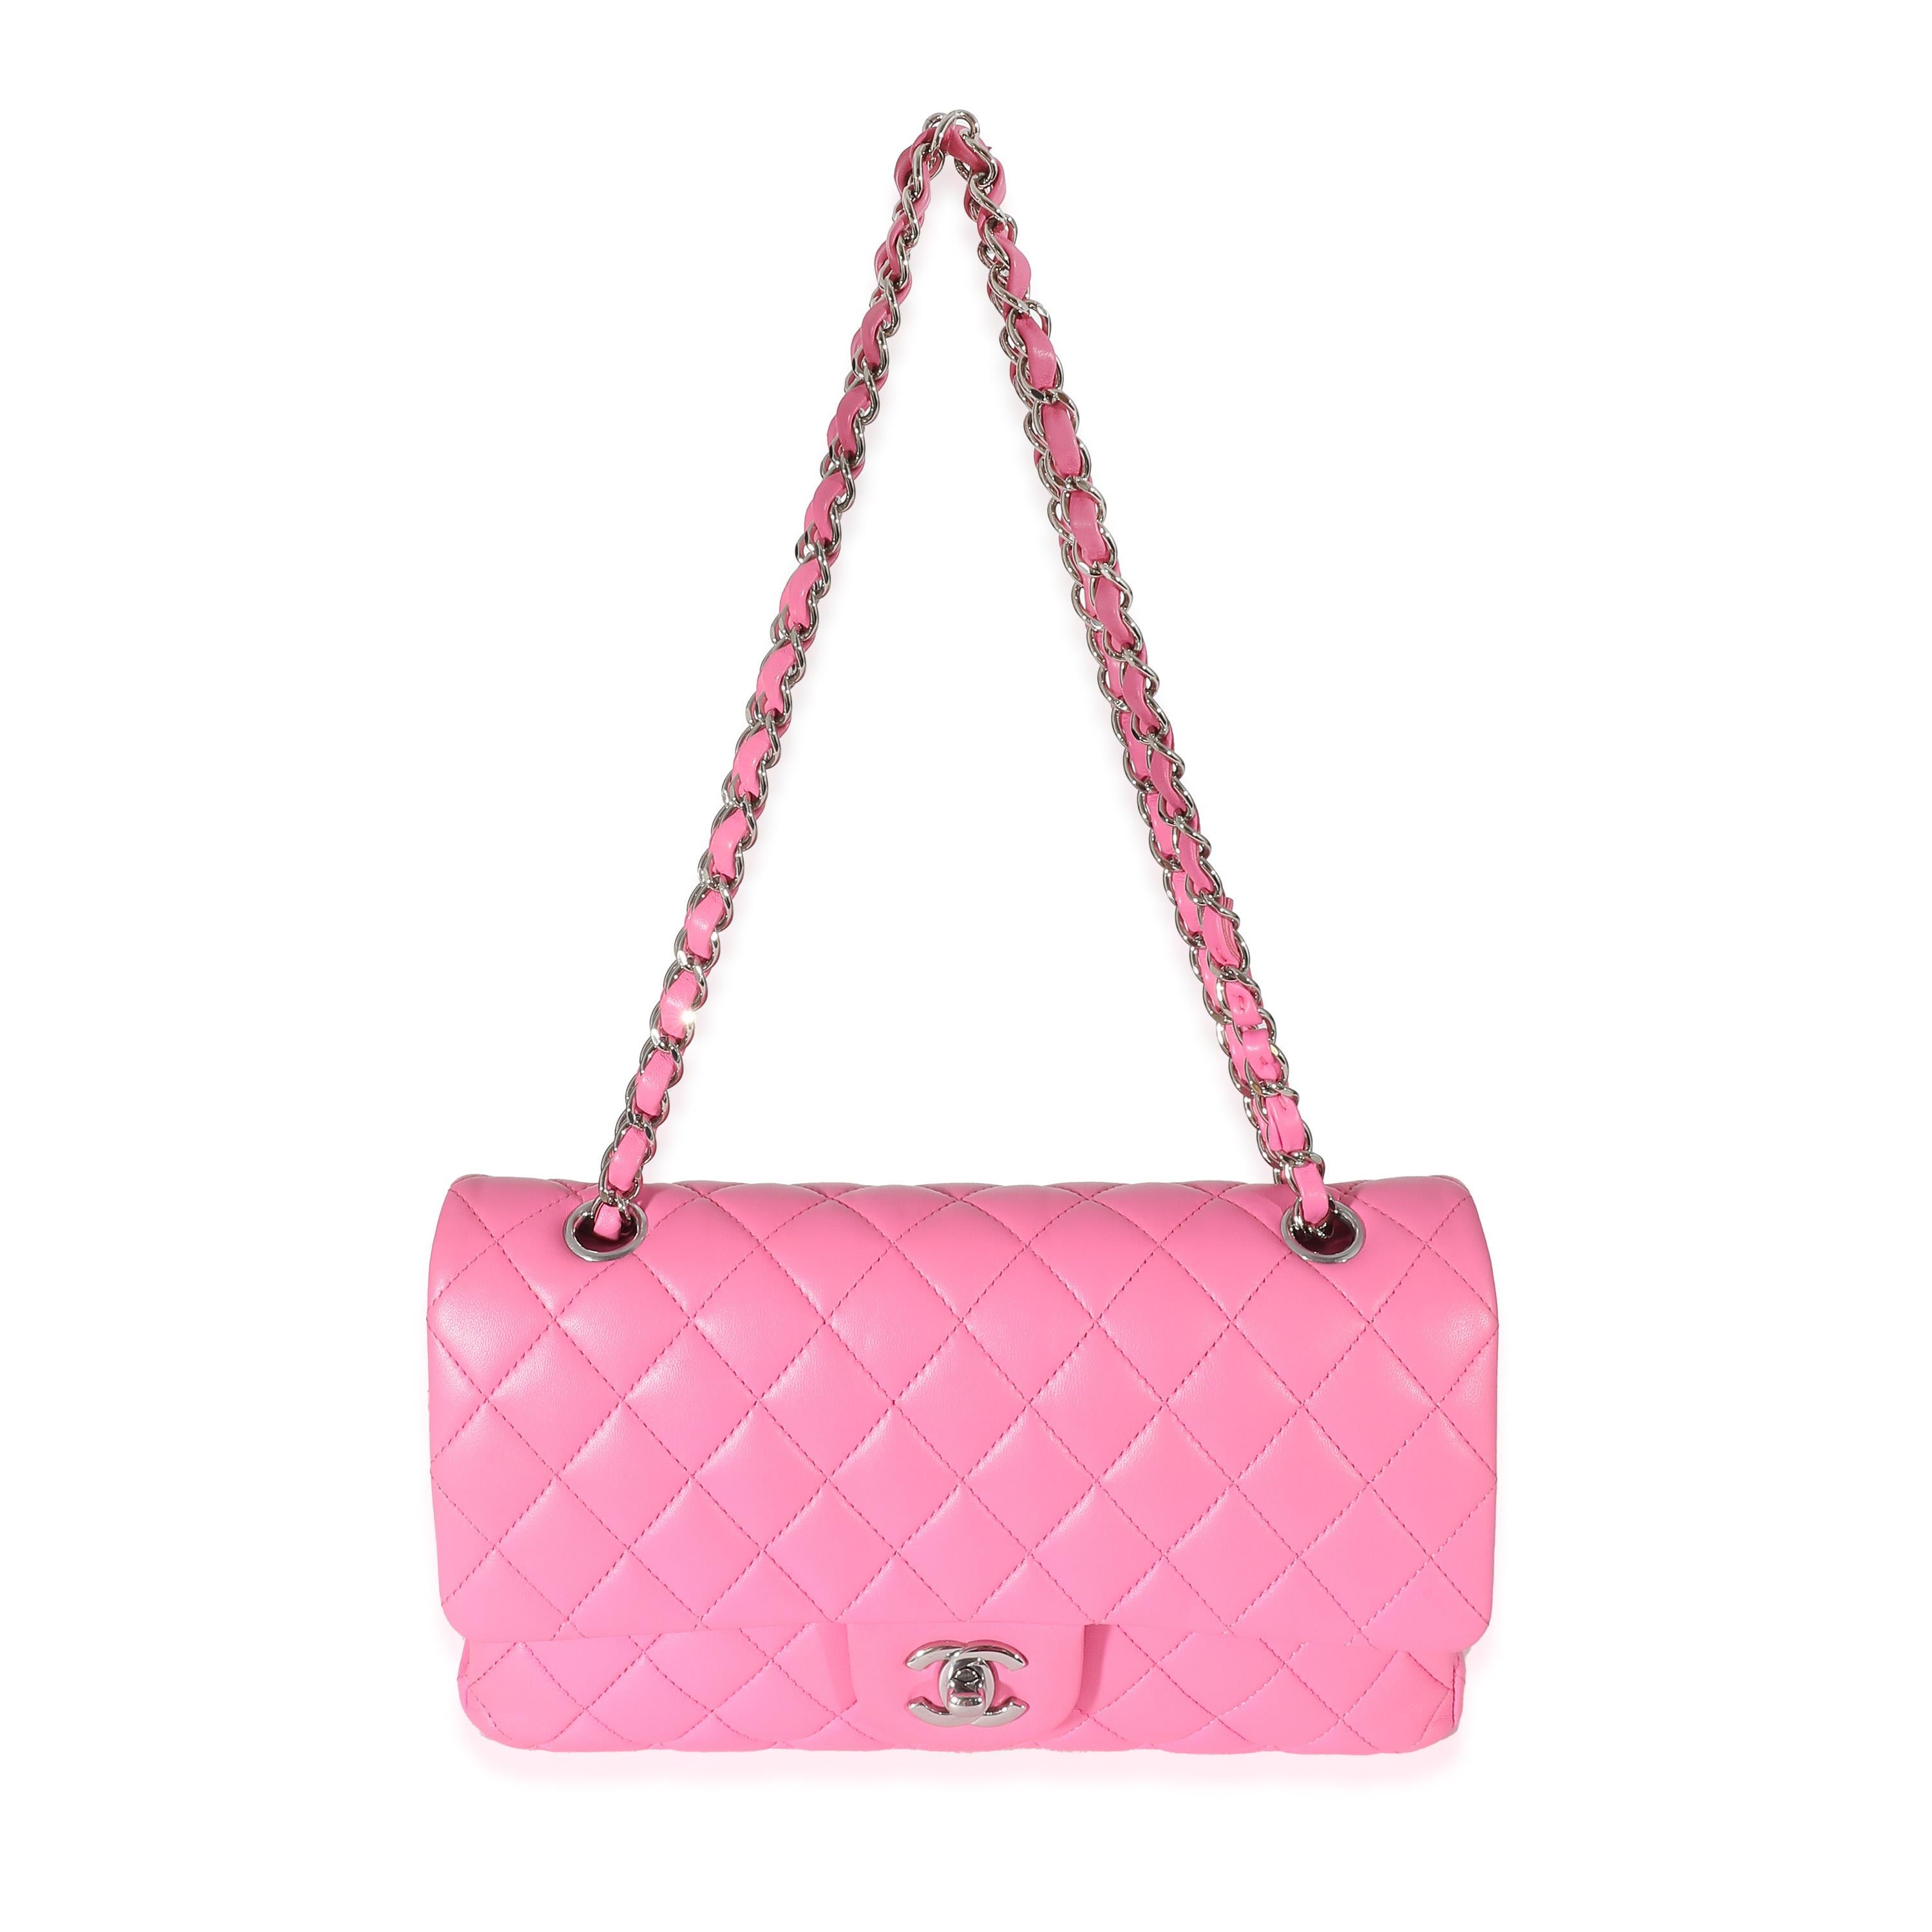 Listing Title: Chanel Pink Quilted Lambskin Medium Classic Double Flap Bag
SKU: 134011
Condition: Pre-owned 
Handbag Condition: Very Good
Condition Comments: Item is in very good condition with minor signs of wear. Exterior scuffing and light